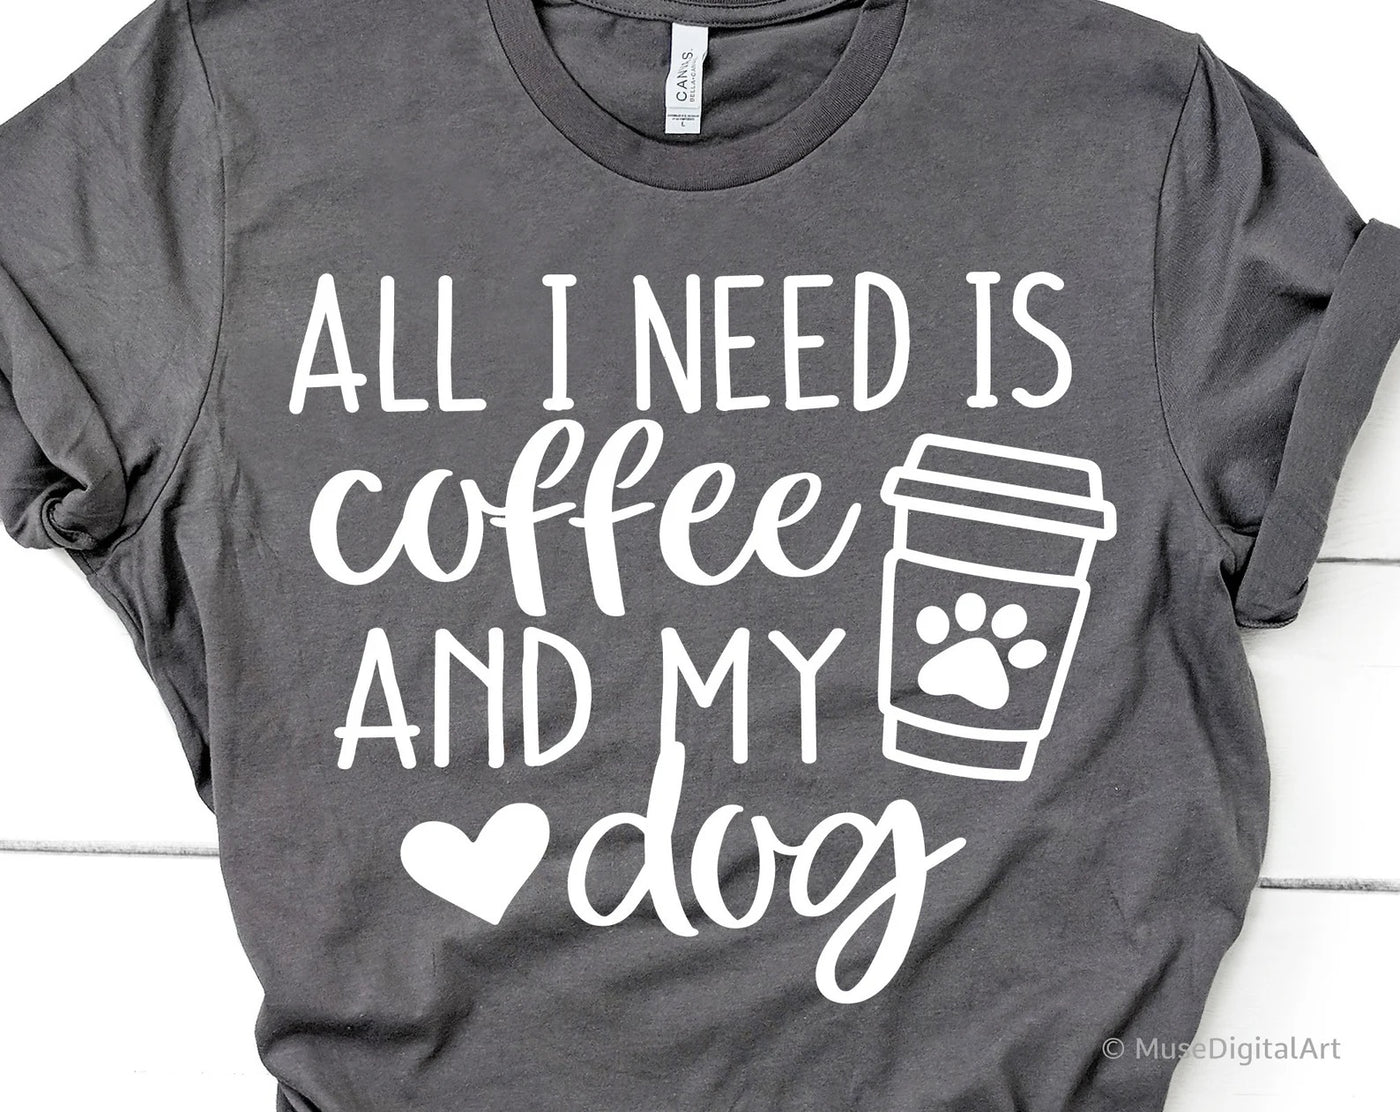 "All I Need is Coffee and My Dog" T-shirt (shown on "Asphalt")